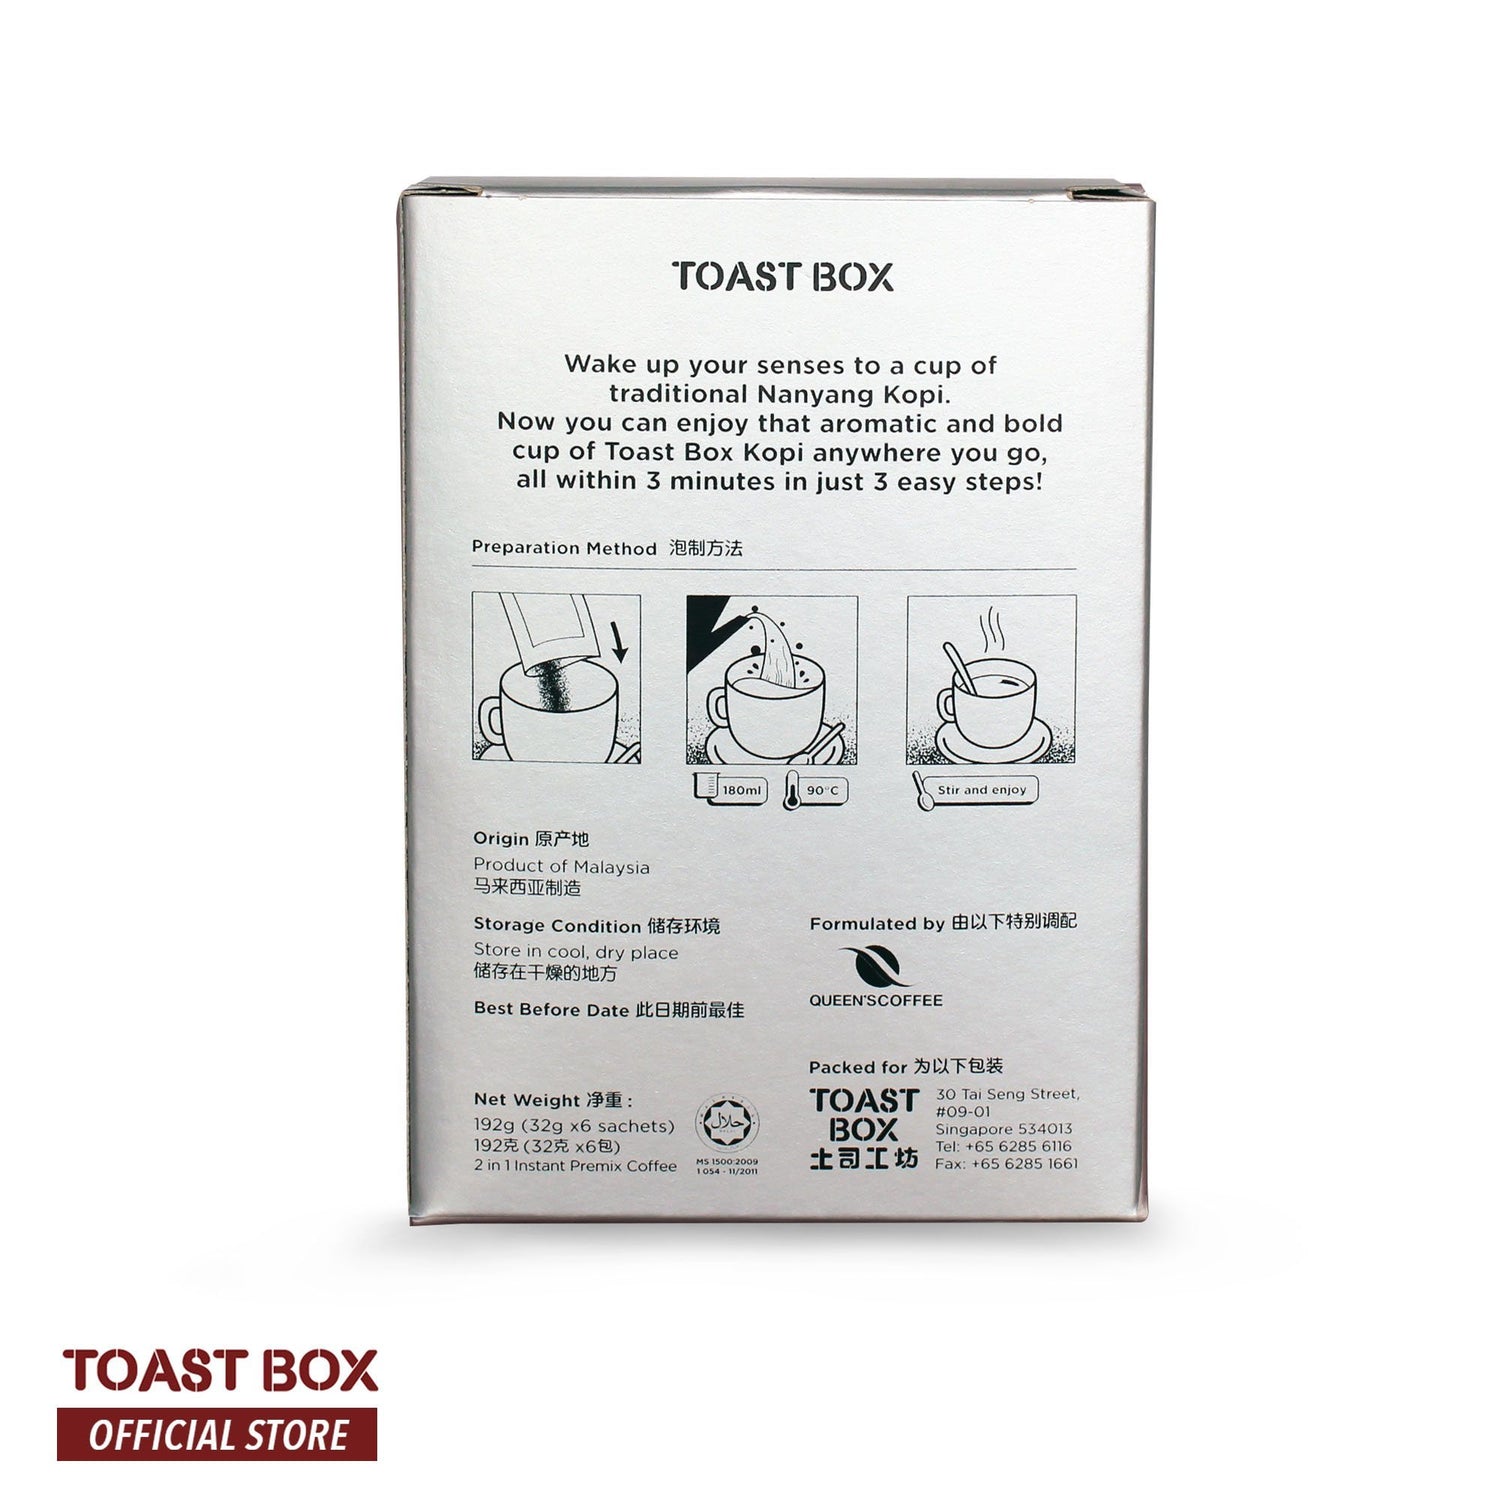 [Toast Box] Kopi with Creamer Coffee with Creamer Unsweetened 32gm x 6 sachets - Bloom Concept